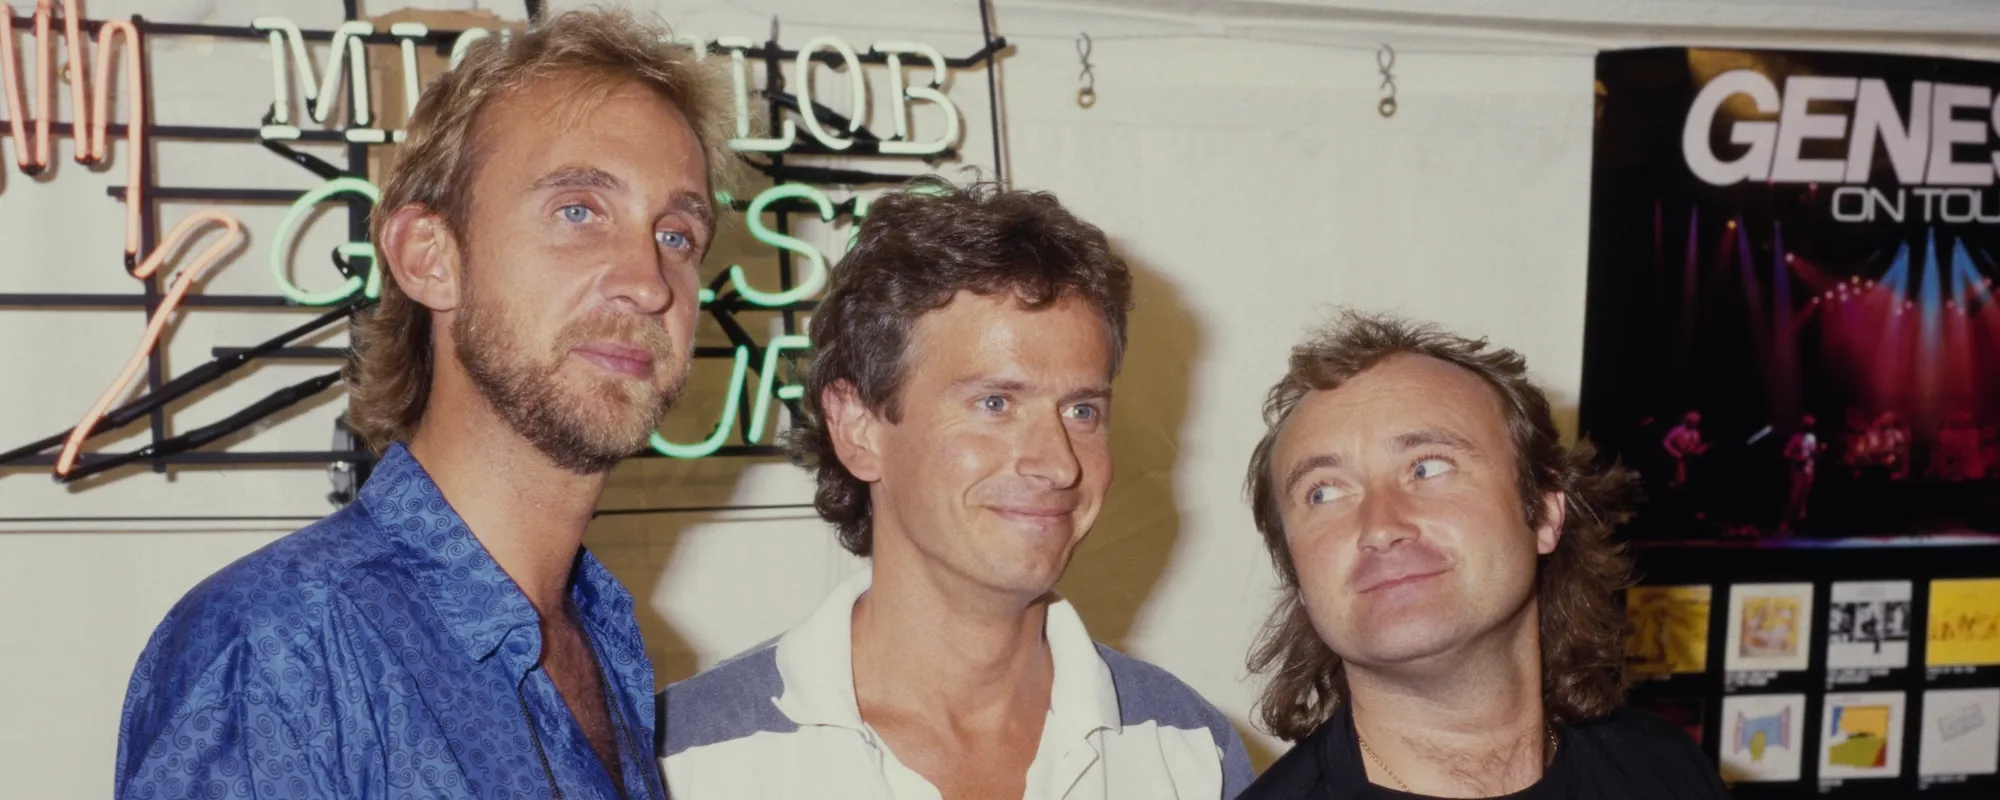 The Song Genesis Stopped Playing Live in 1987 and Retired During Their 2007 Reunion Tour